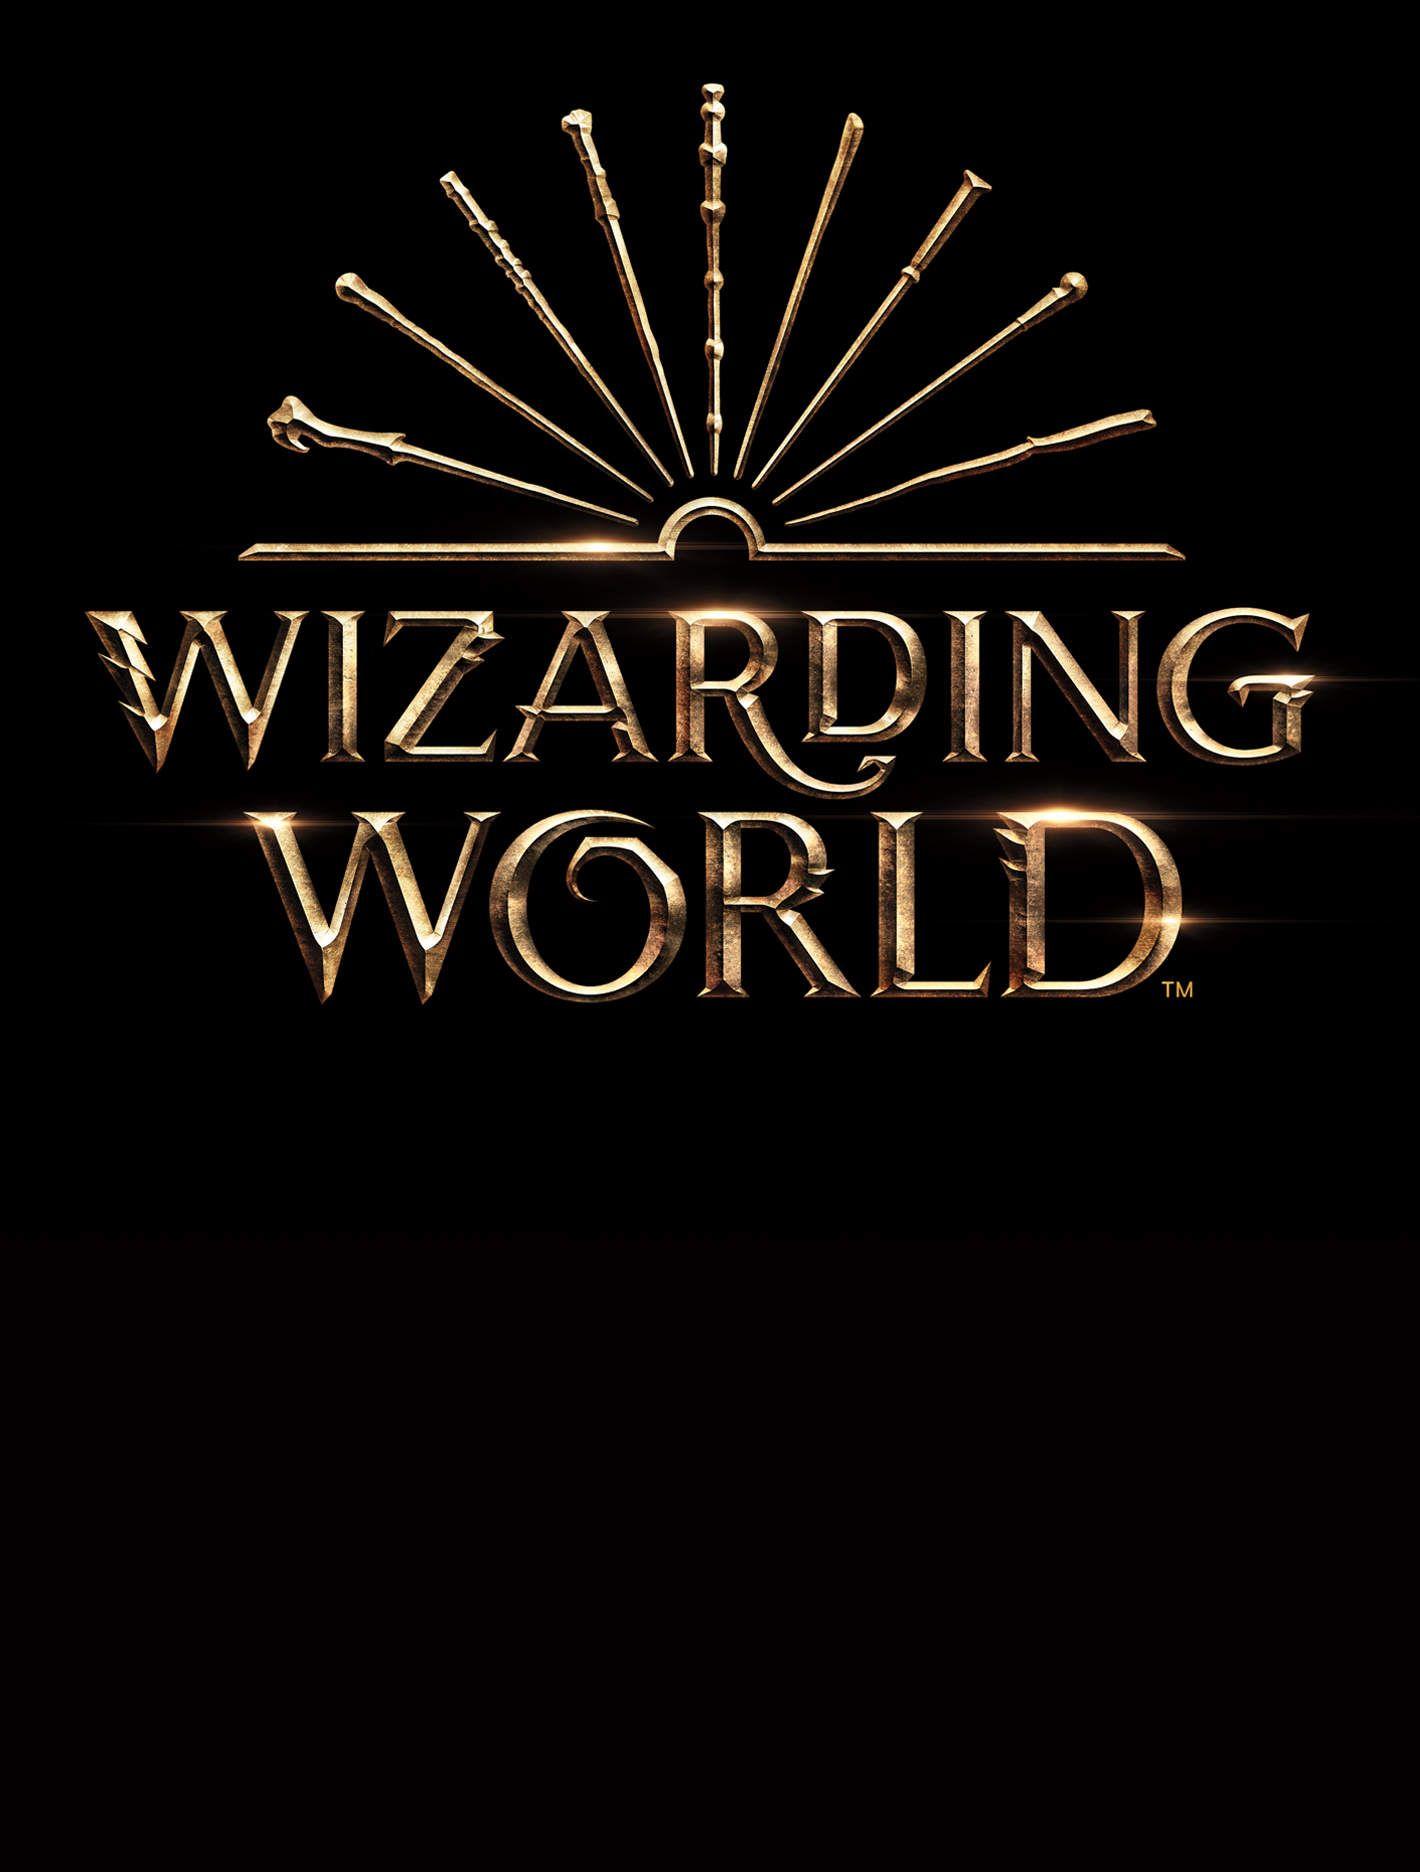 Wizarding World Logo - A guide to the wands in the new Wizarding World logo